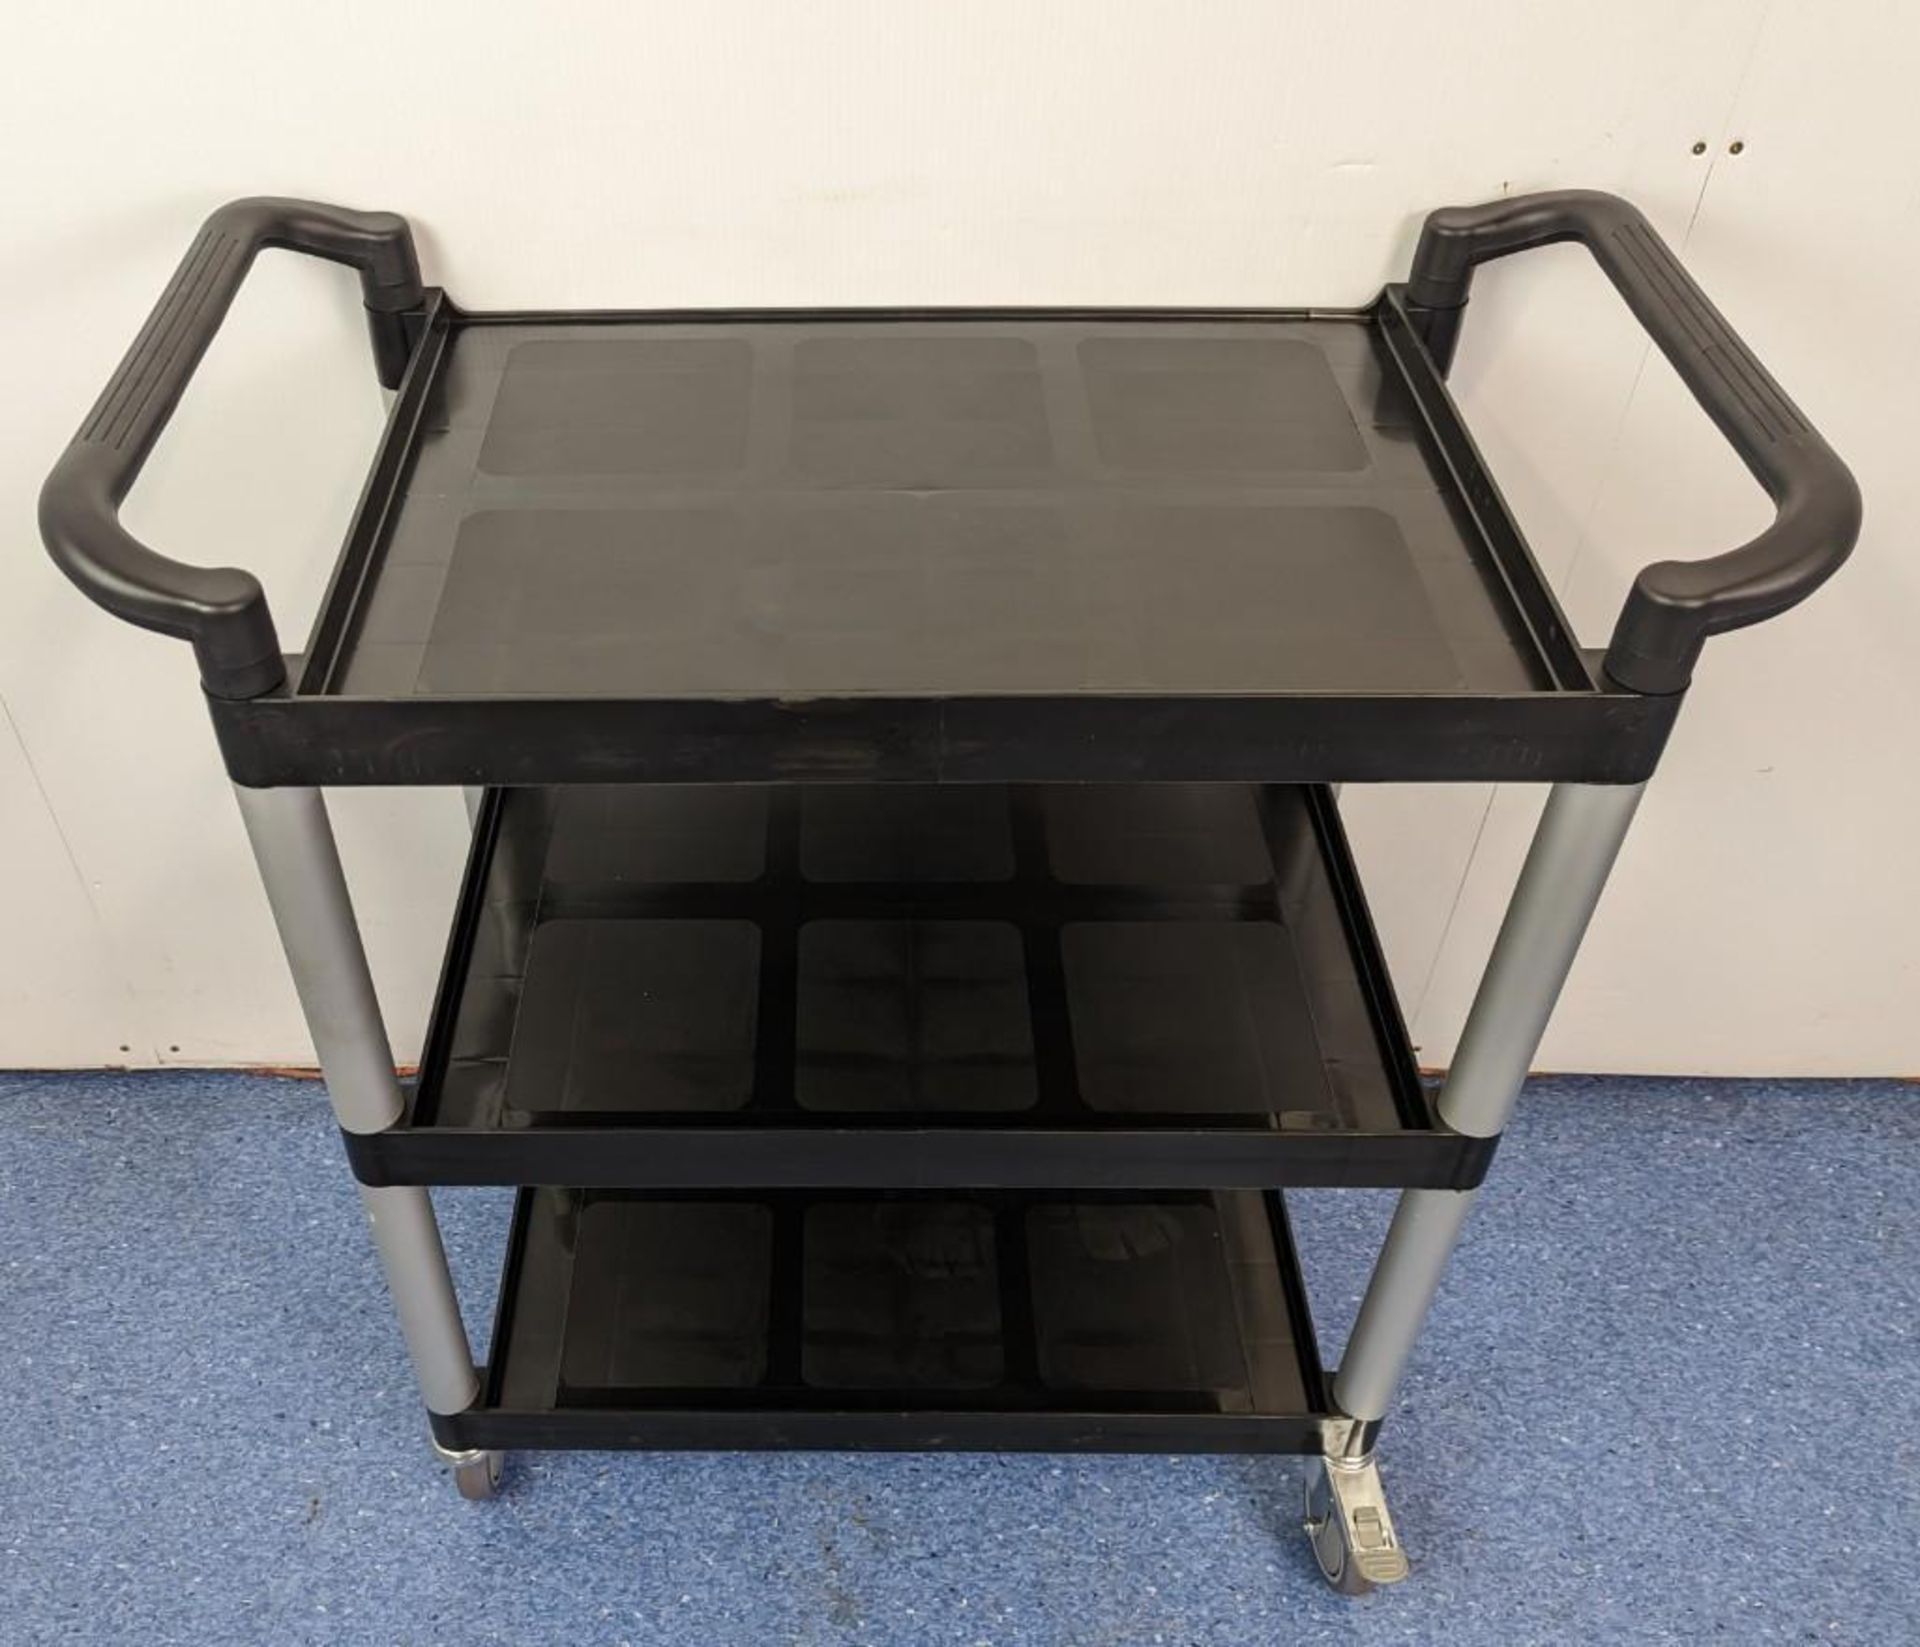 24" X 16" BLACK PLASTIC 3 TIER BUSSING CART - NEW - OMCAN 24183 - Image 4 of 5